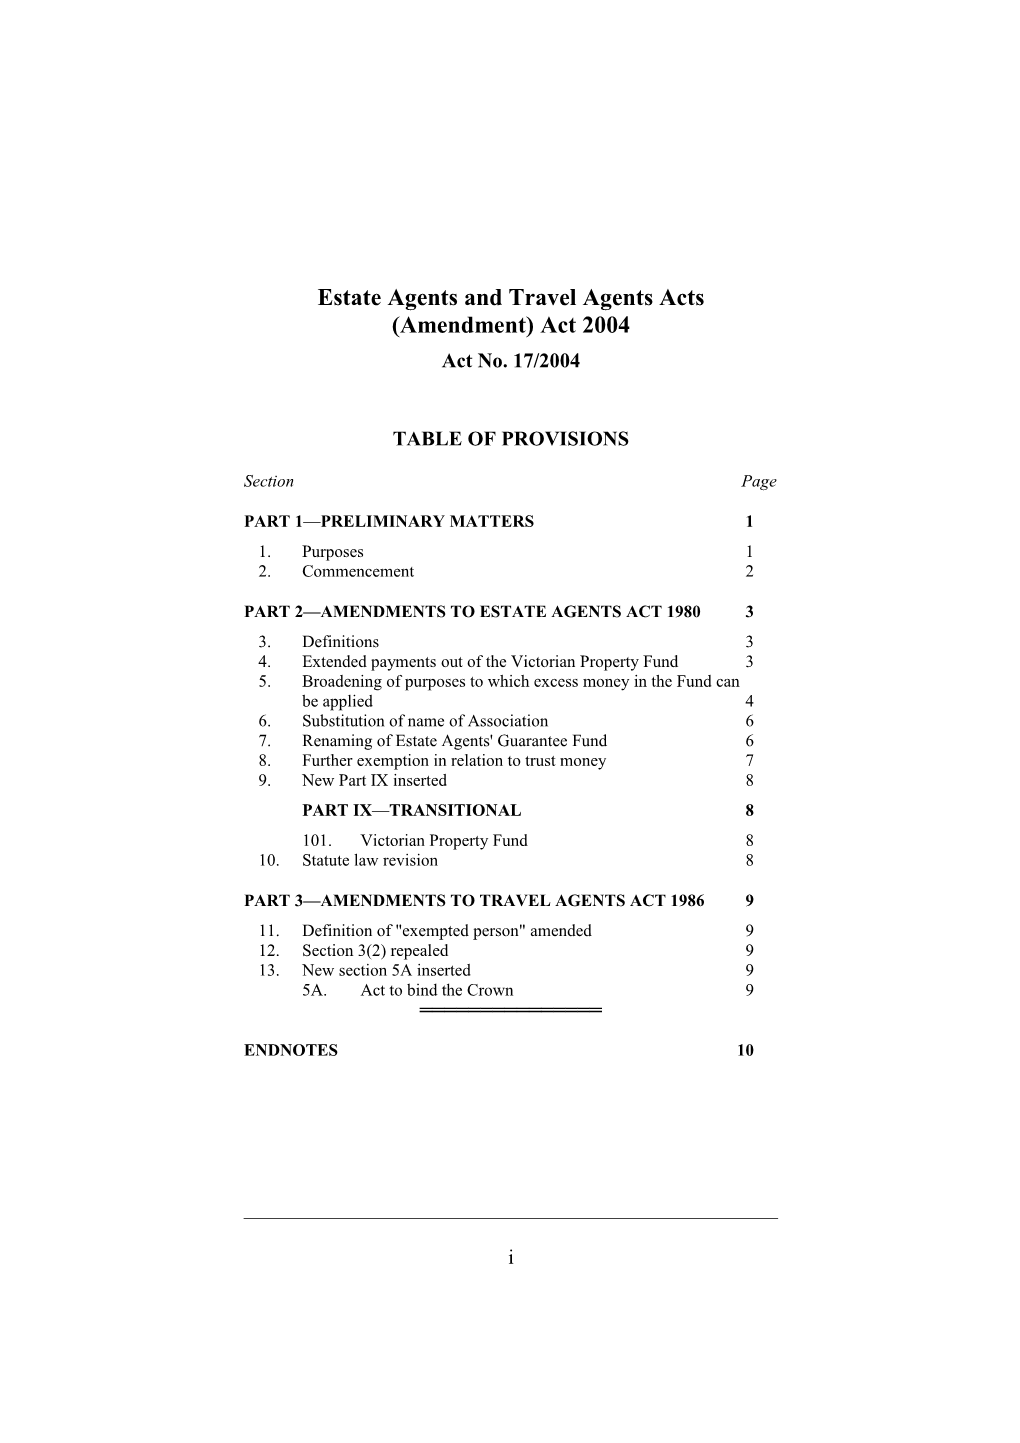 Estate Agents and Travel Agents Acts (Amendment) Act 2004